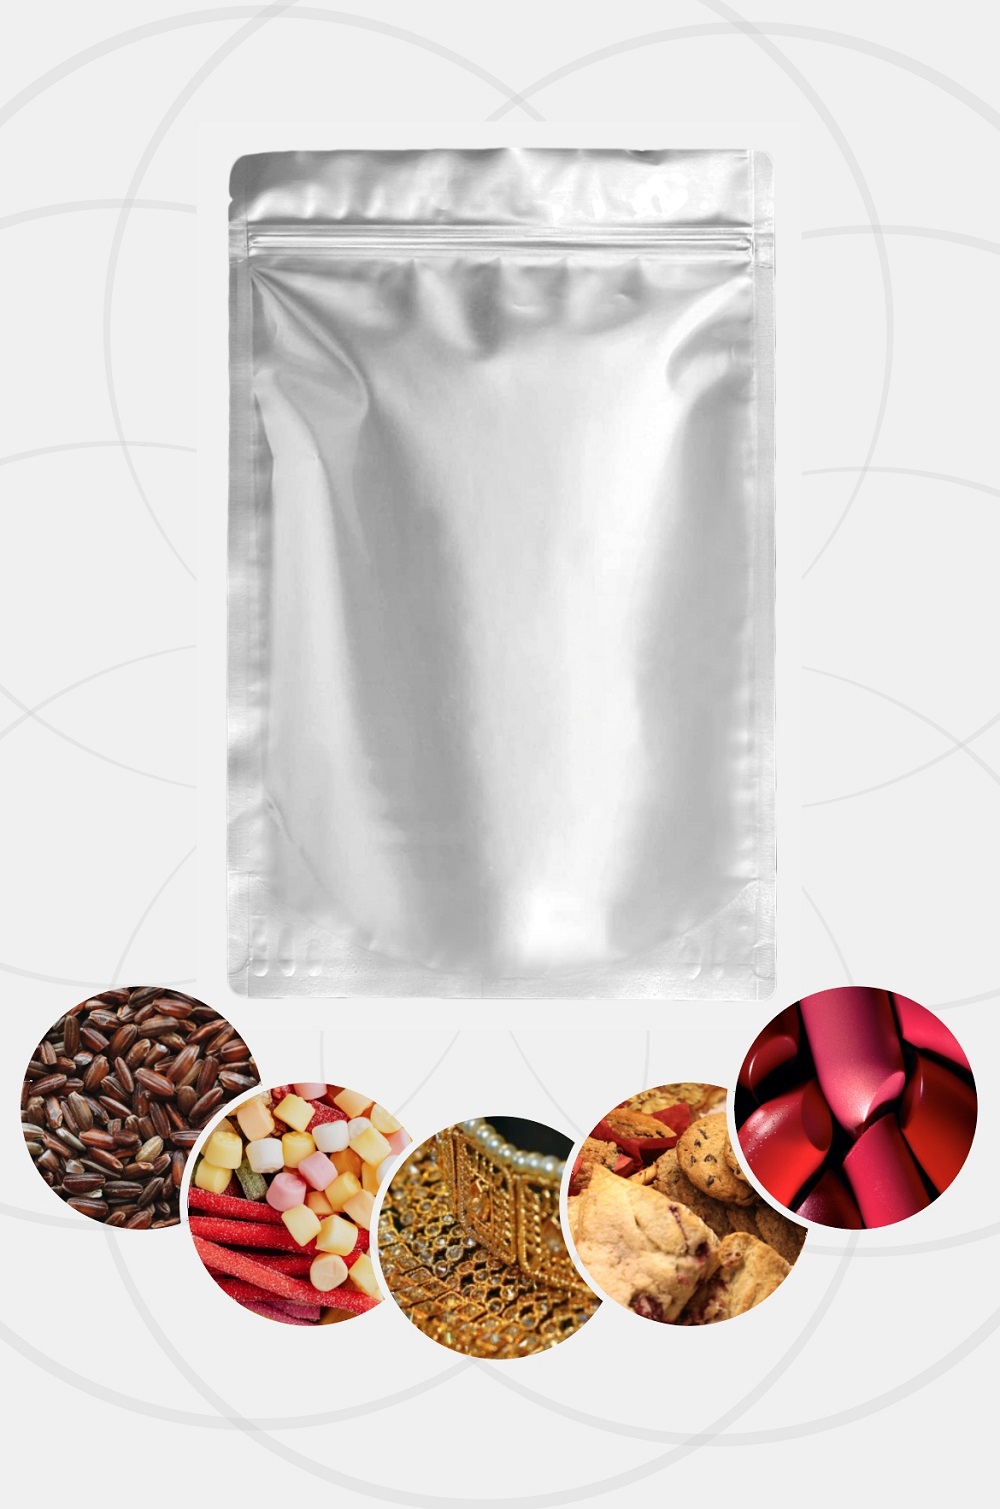 Quart 7 Mil Seal-Top Premium Gusset Mylar Bags and Oxygen